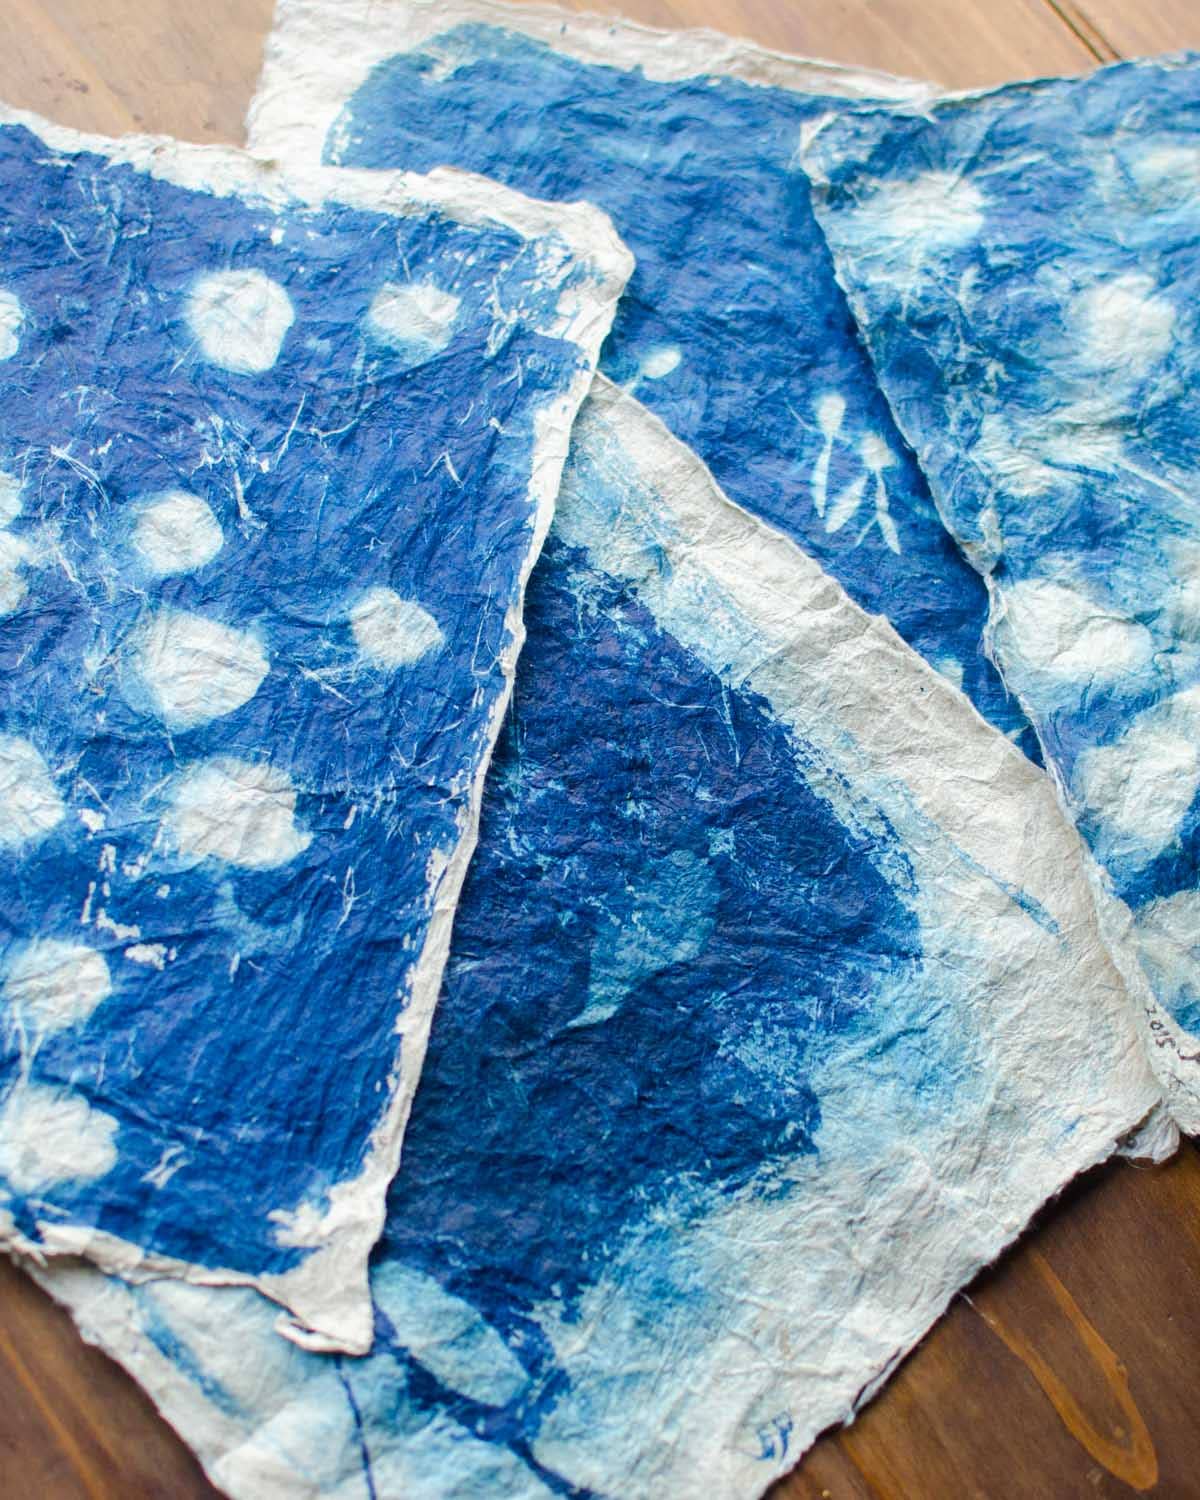 Why This Japanese Artist Spends Months Making Sheets of Painstakingly Gorgeous Paper by Hand